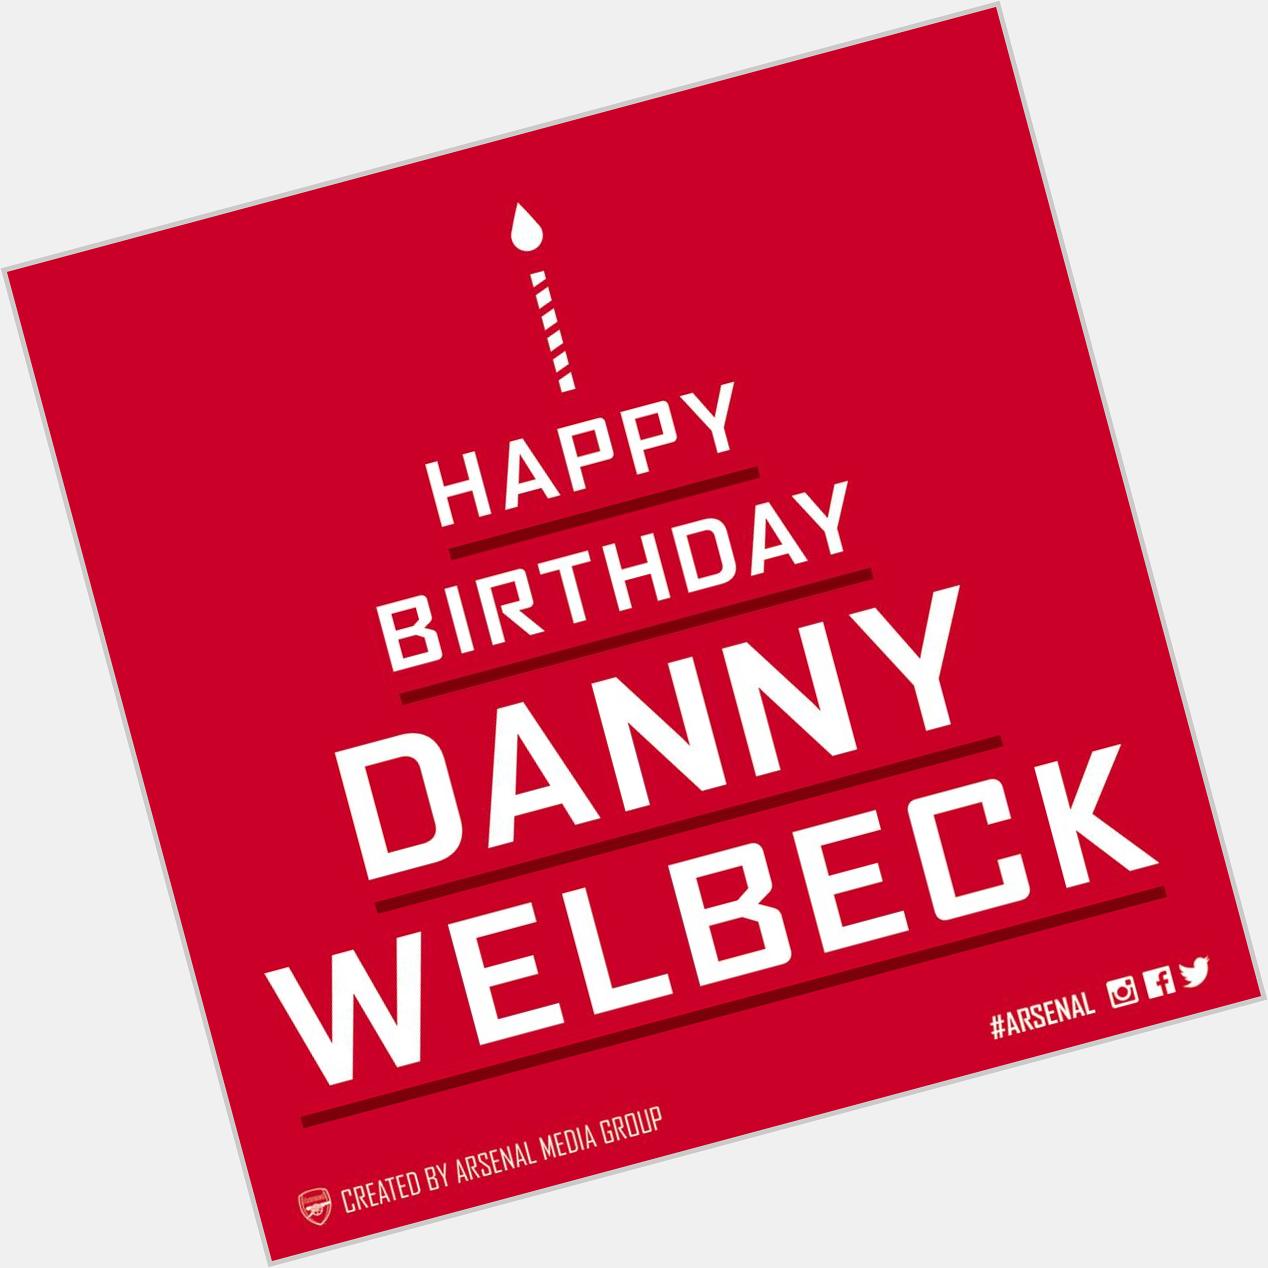 RT. Morning all and happy birthday to Danny Welbeck who turns 24 today! 